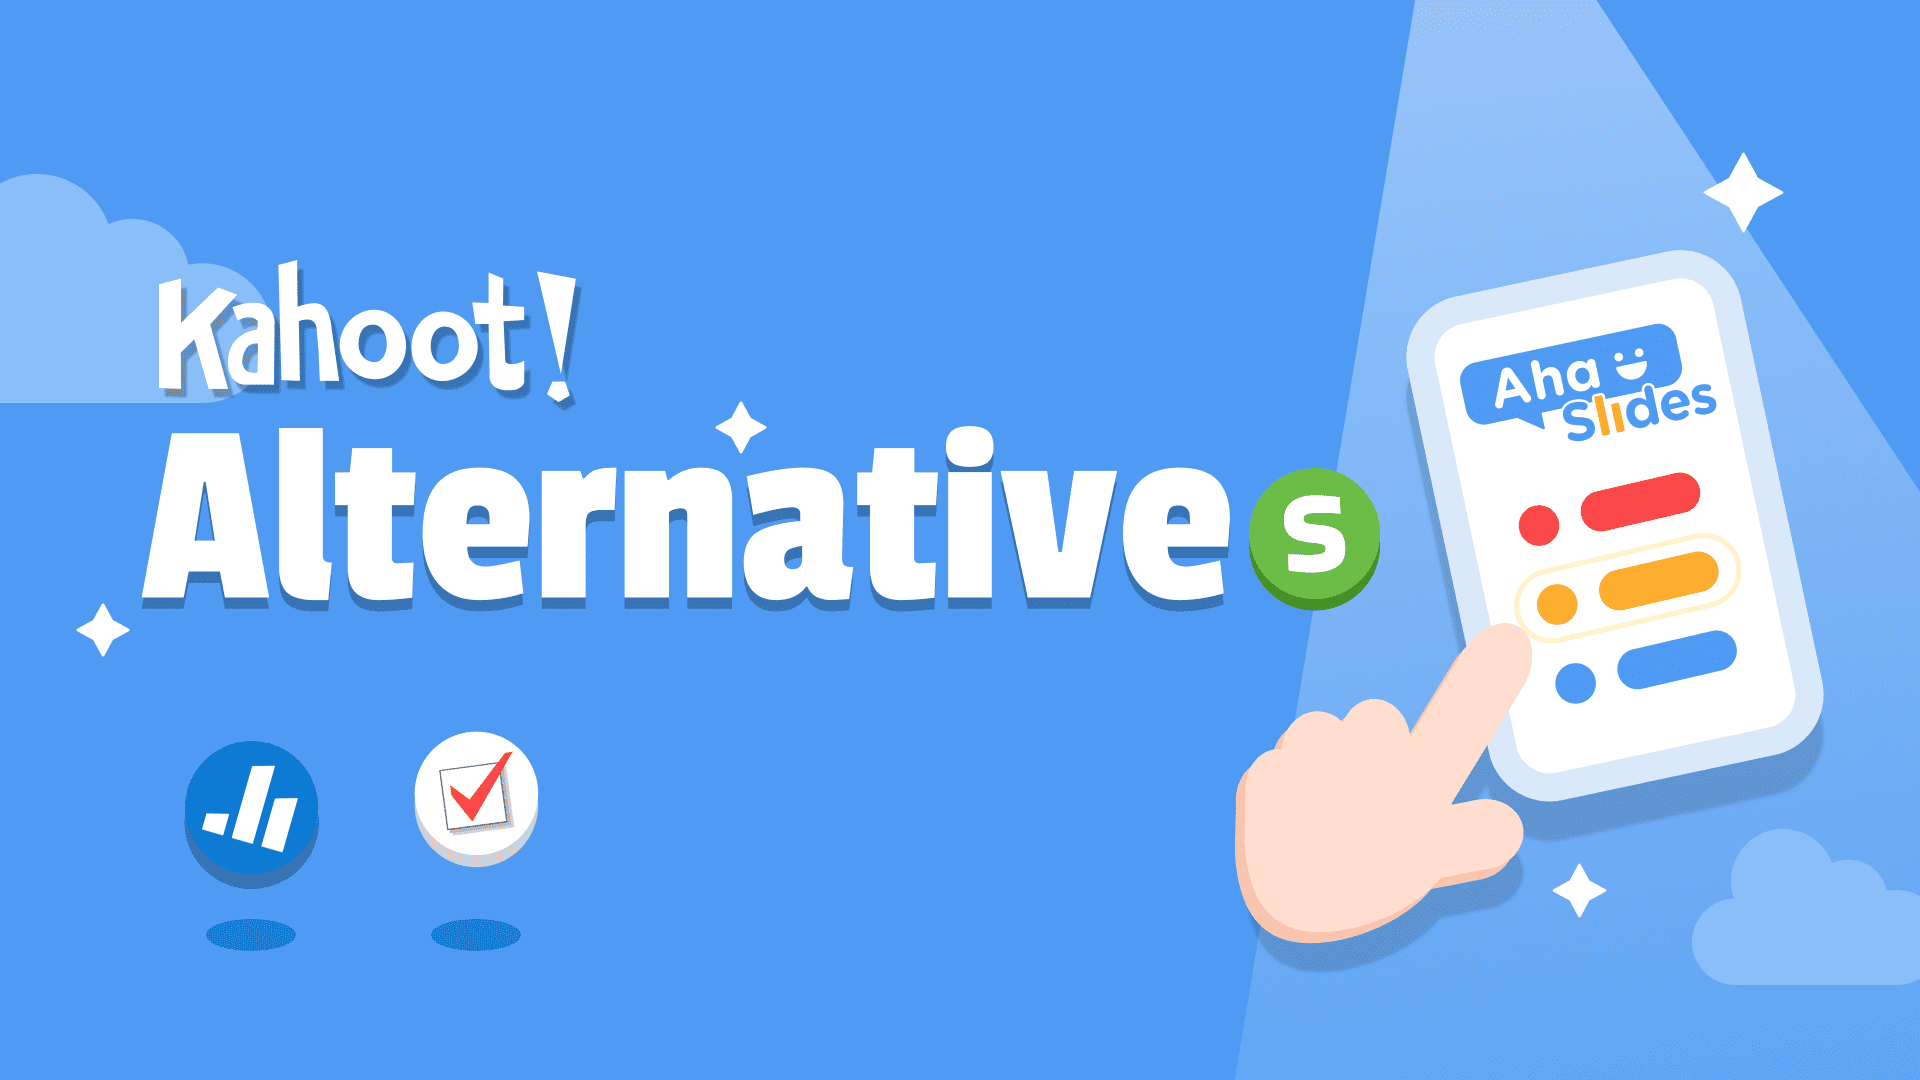 Top 7 Alternatives To Kahoot In 2021 The Definitive Comparison List